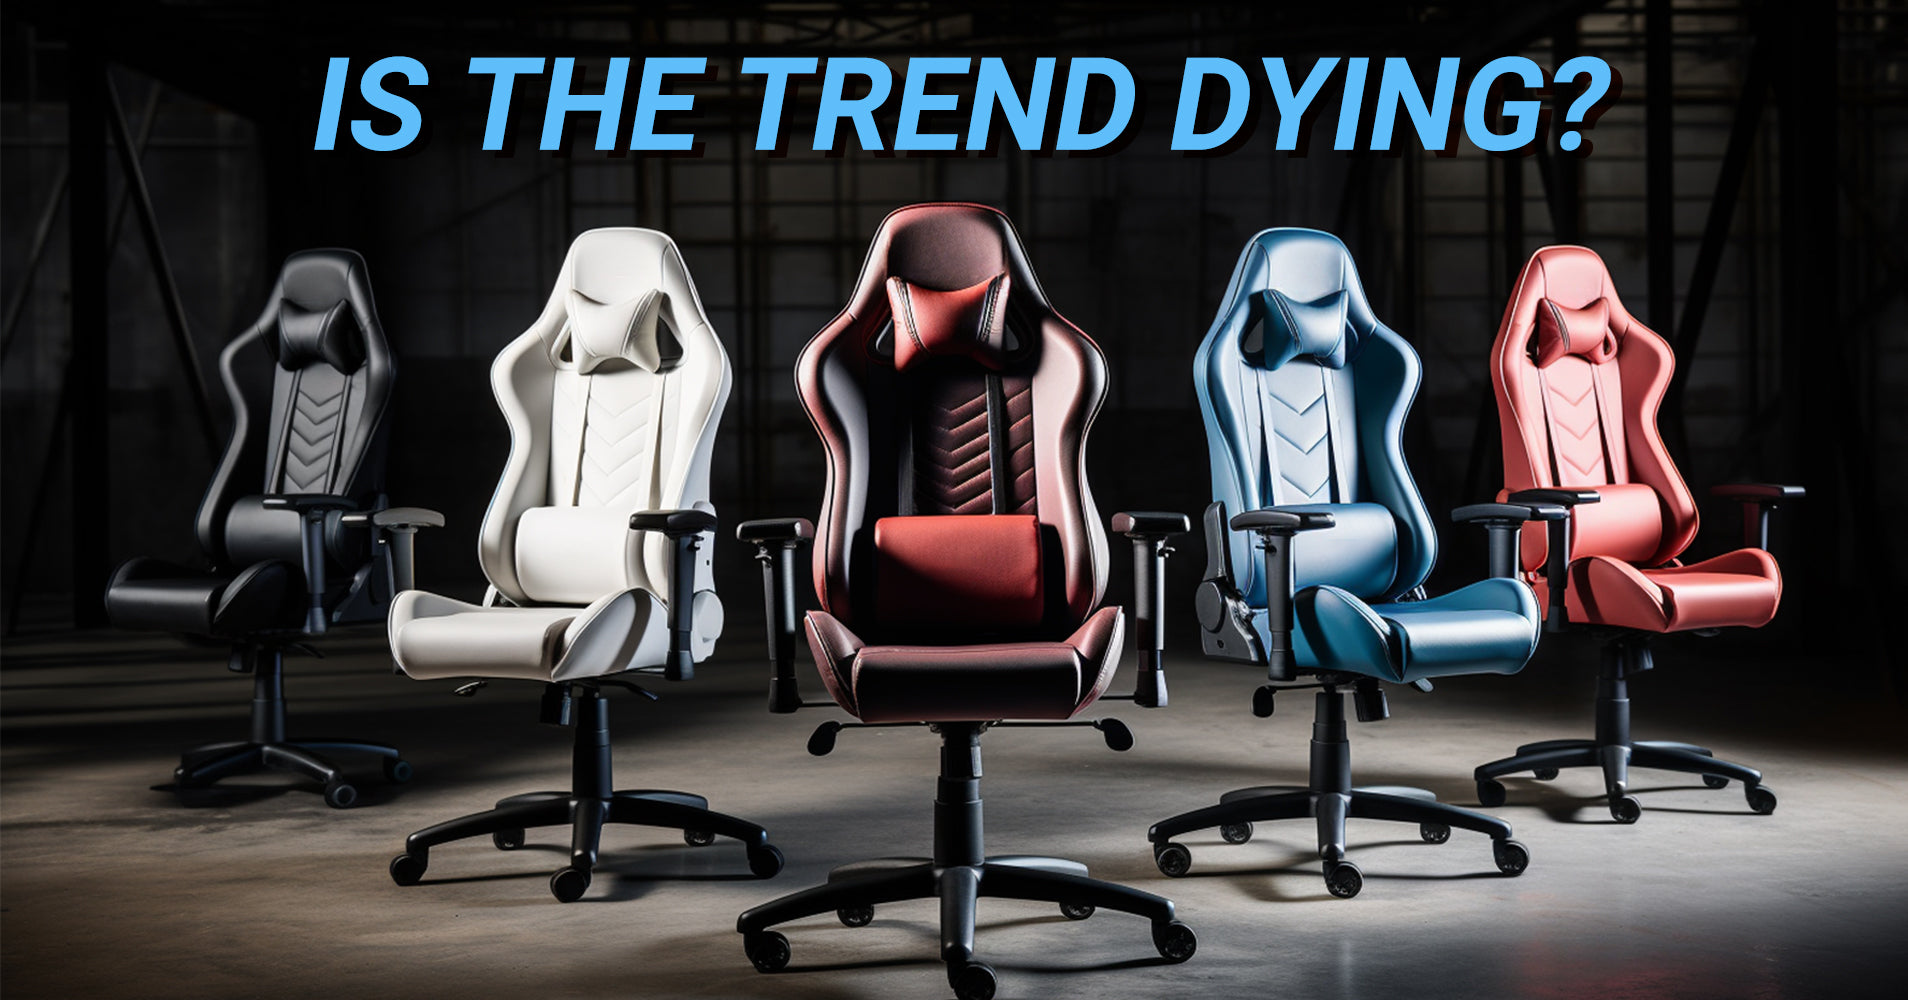 A selection of Flujo gaming chairs in various colors displayed against an industrial backdrop.